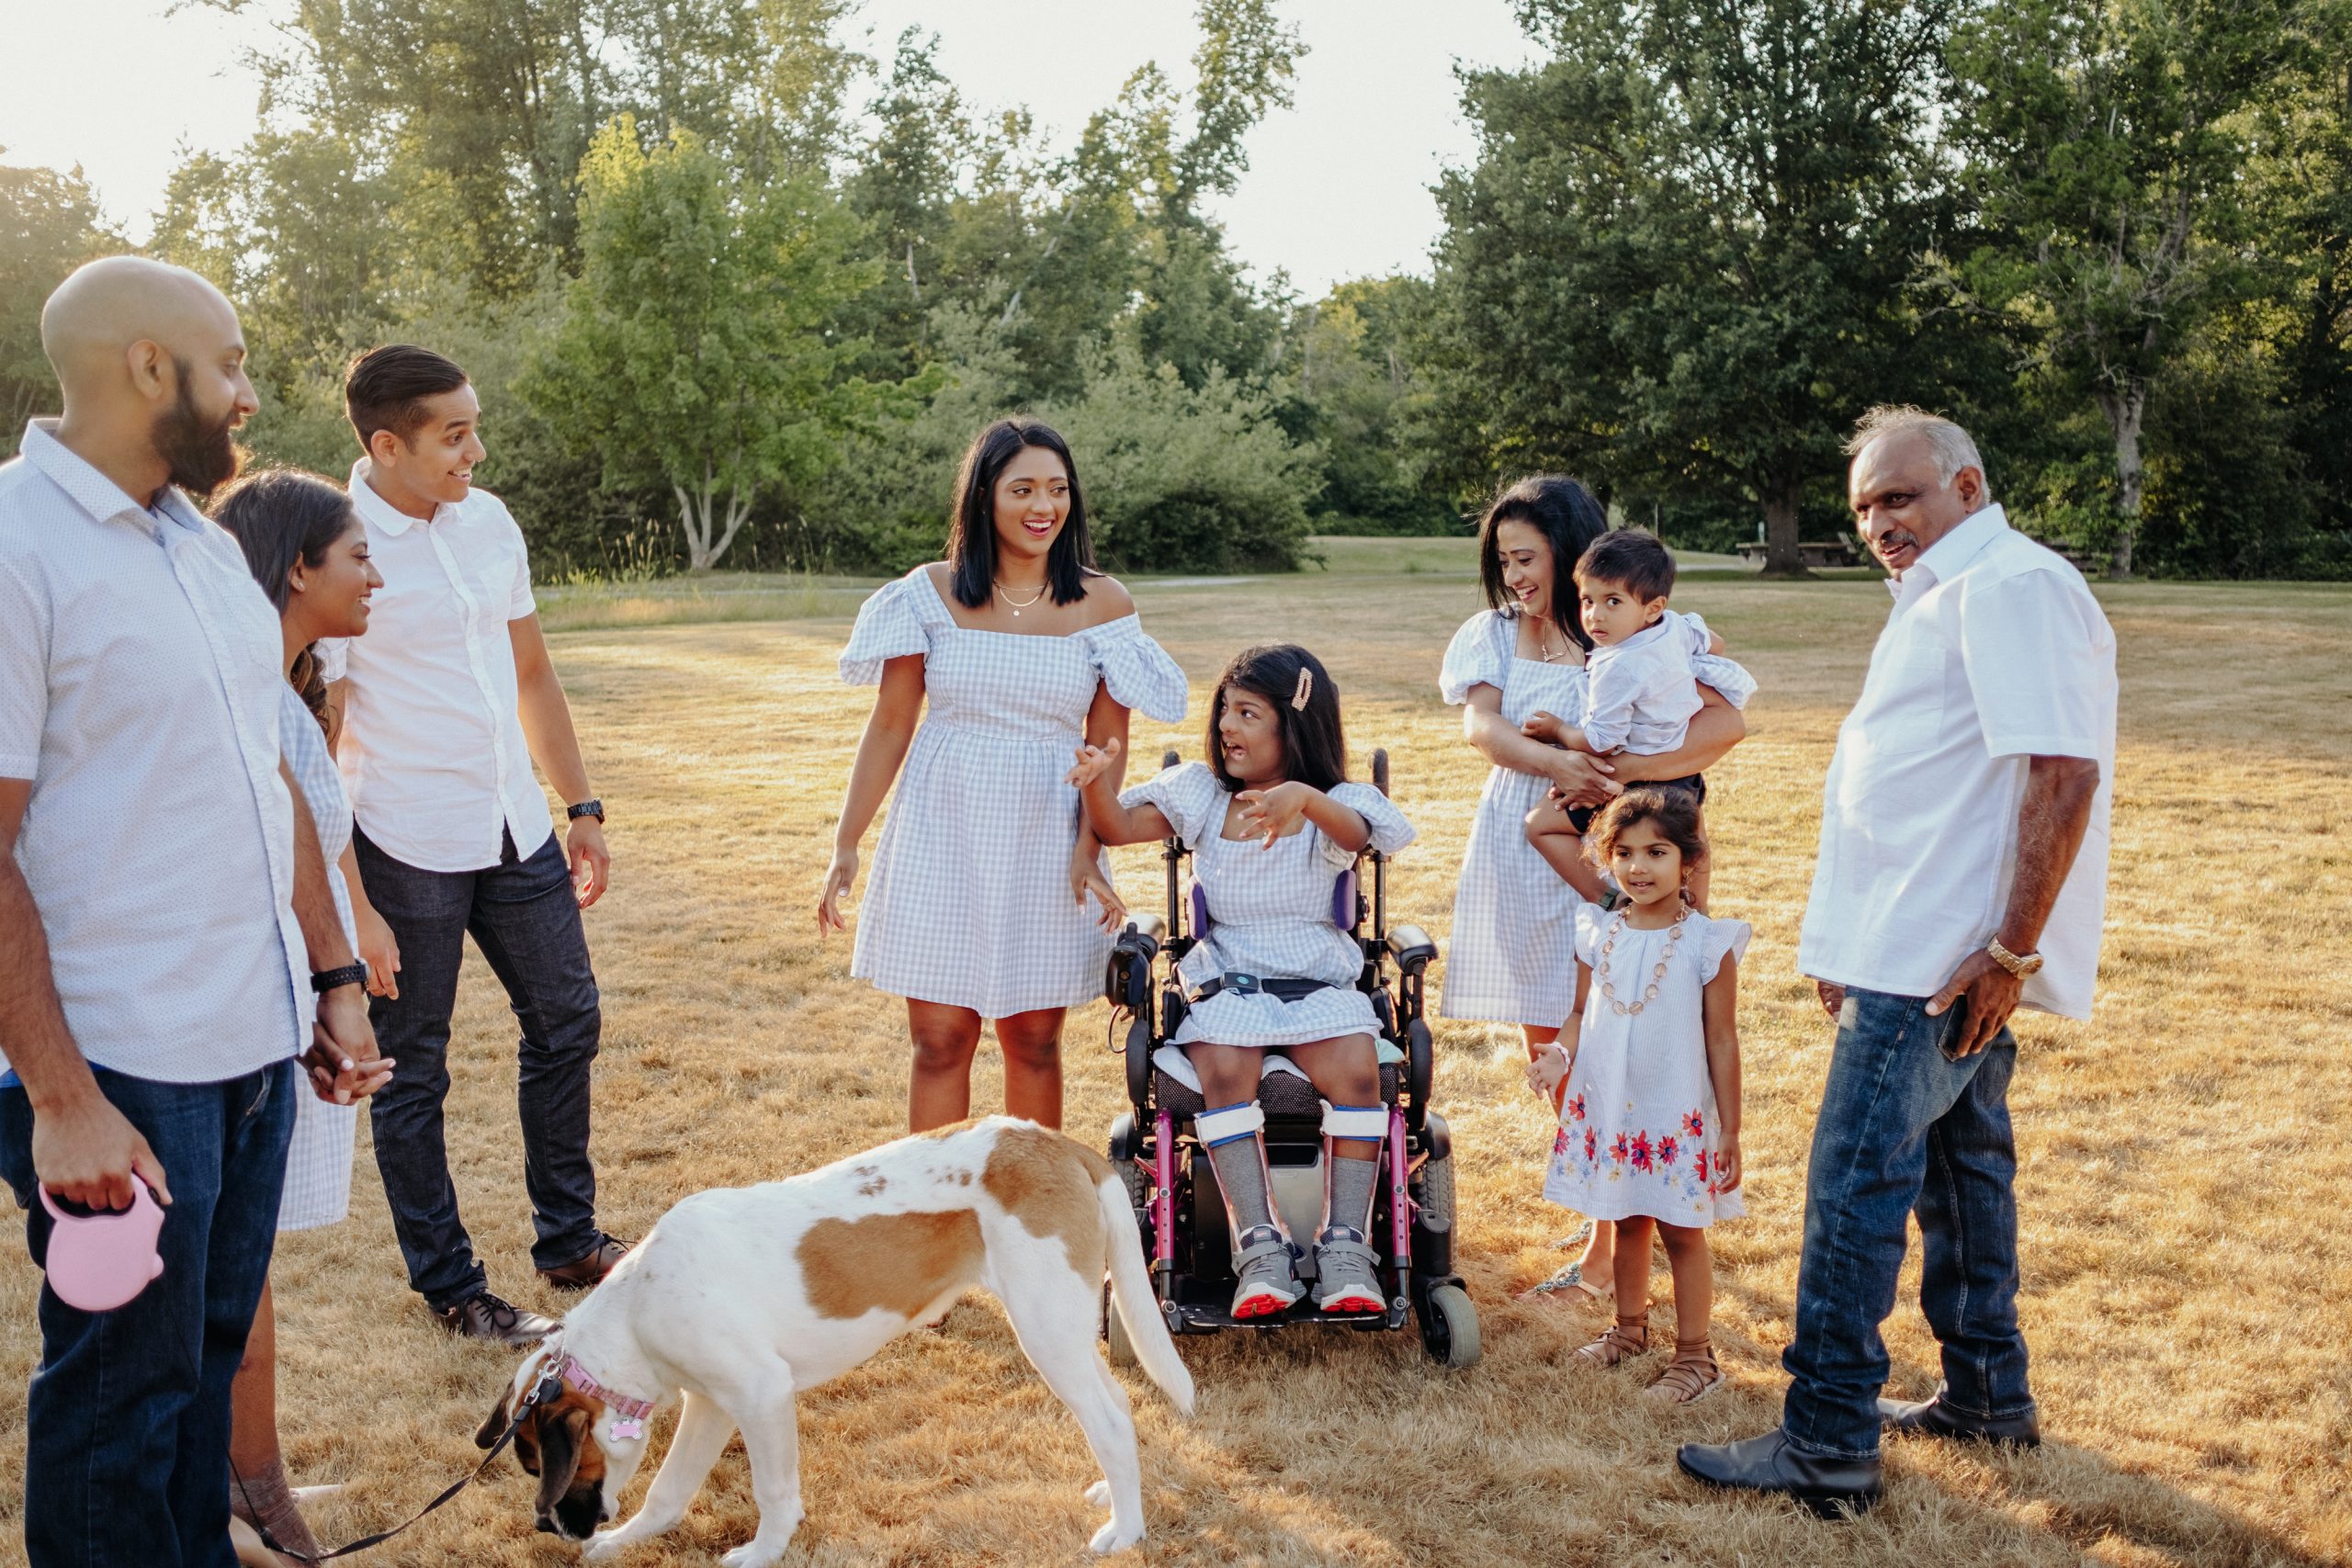 A multi-generational family is gathered in a sunlit field with trees in the background. They are dressed in coordinated outfits of white and light blue. On the left, a man holds a pink leash attached to a medium-sized brown and white dog. Beside him, a young couple holds hands, smiling towards the center where a young girl in a wheelchair is playfully interacting with a young woman in a blue dress. To the right, a woman holds a toddler, with a young girl standing in front, and an older man to the side. The mood is cheerful and familial.